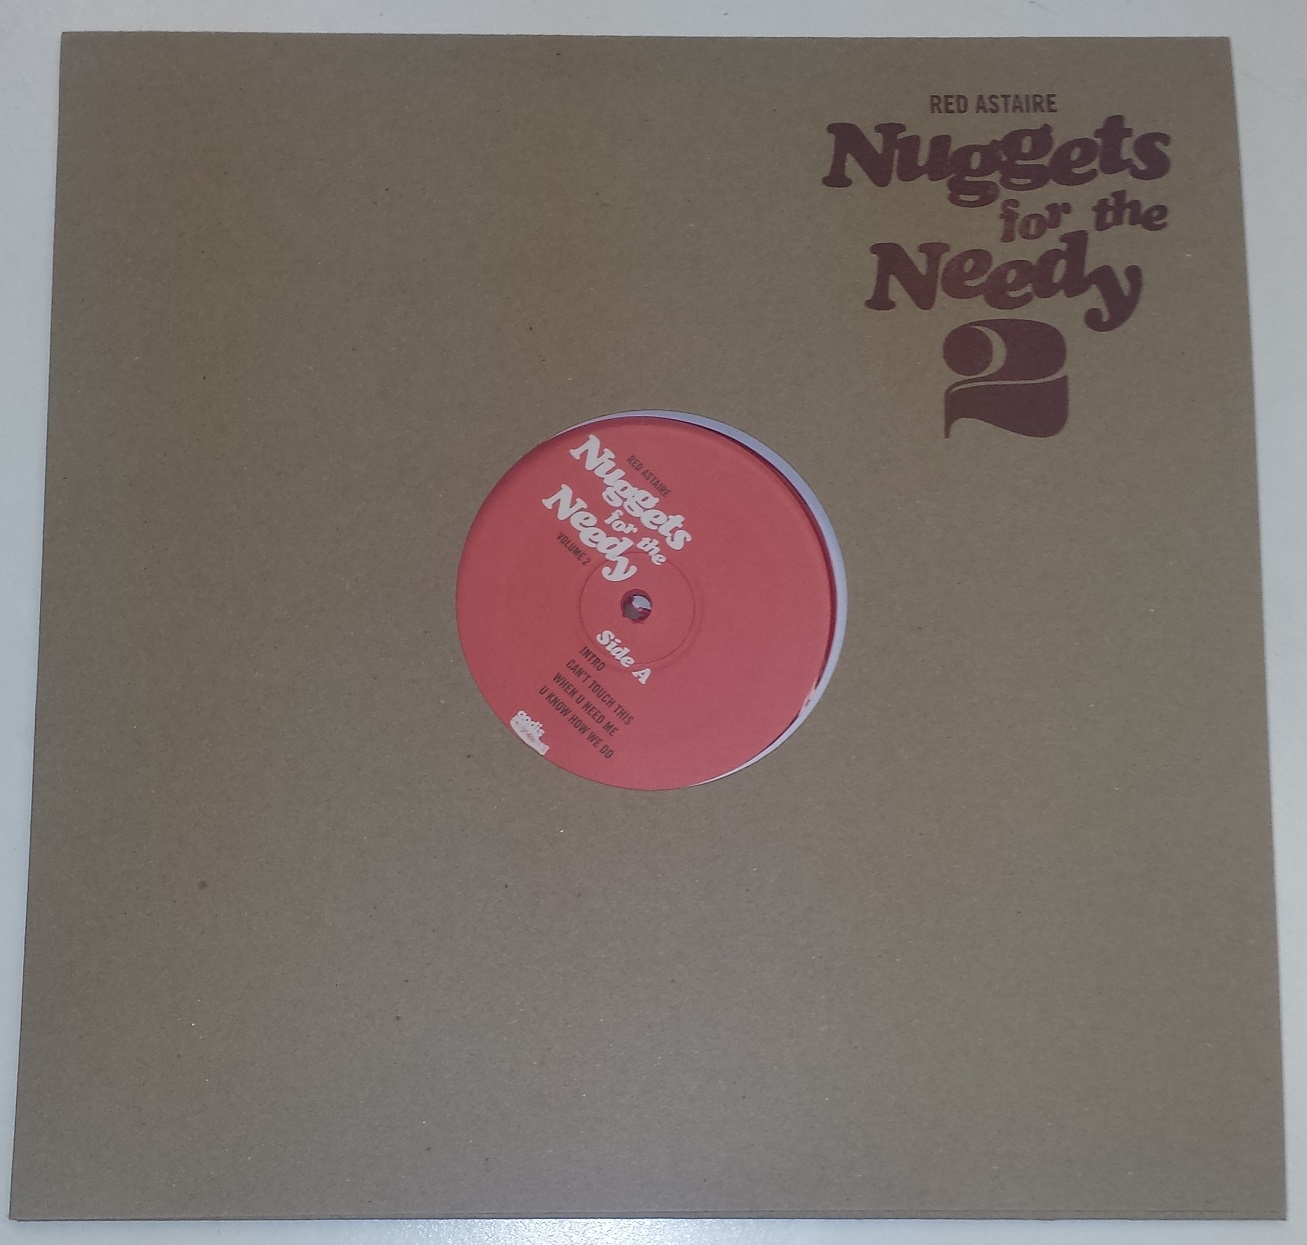 Red Astaire/NUGGETS #2 LTD RED VINYL DLP